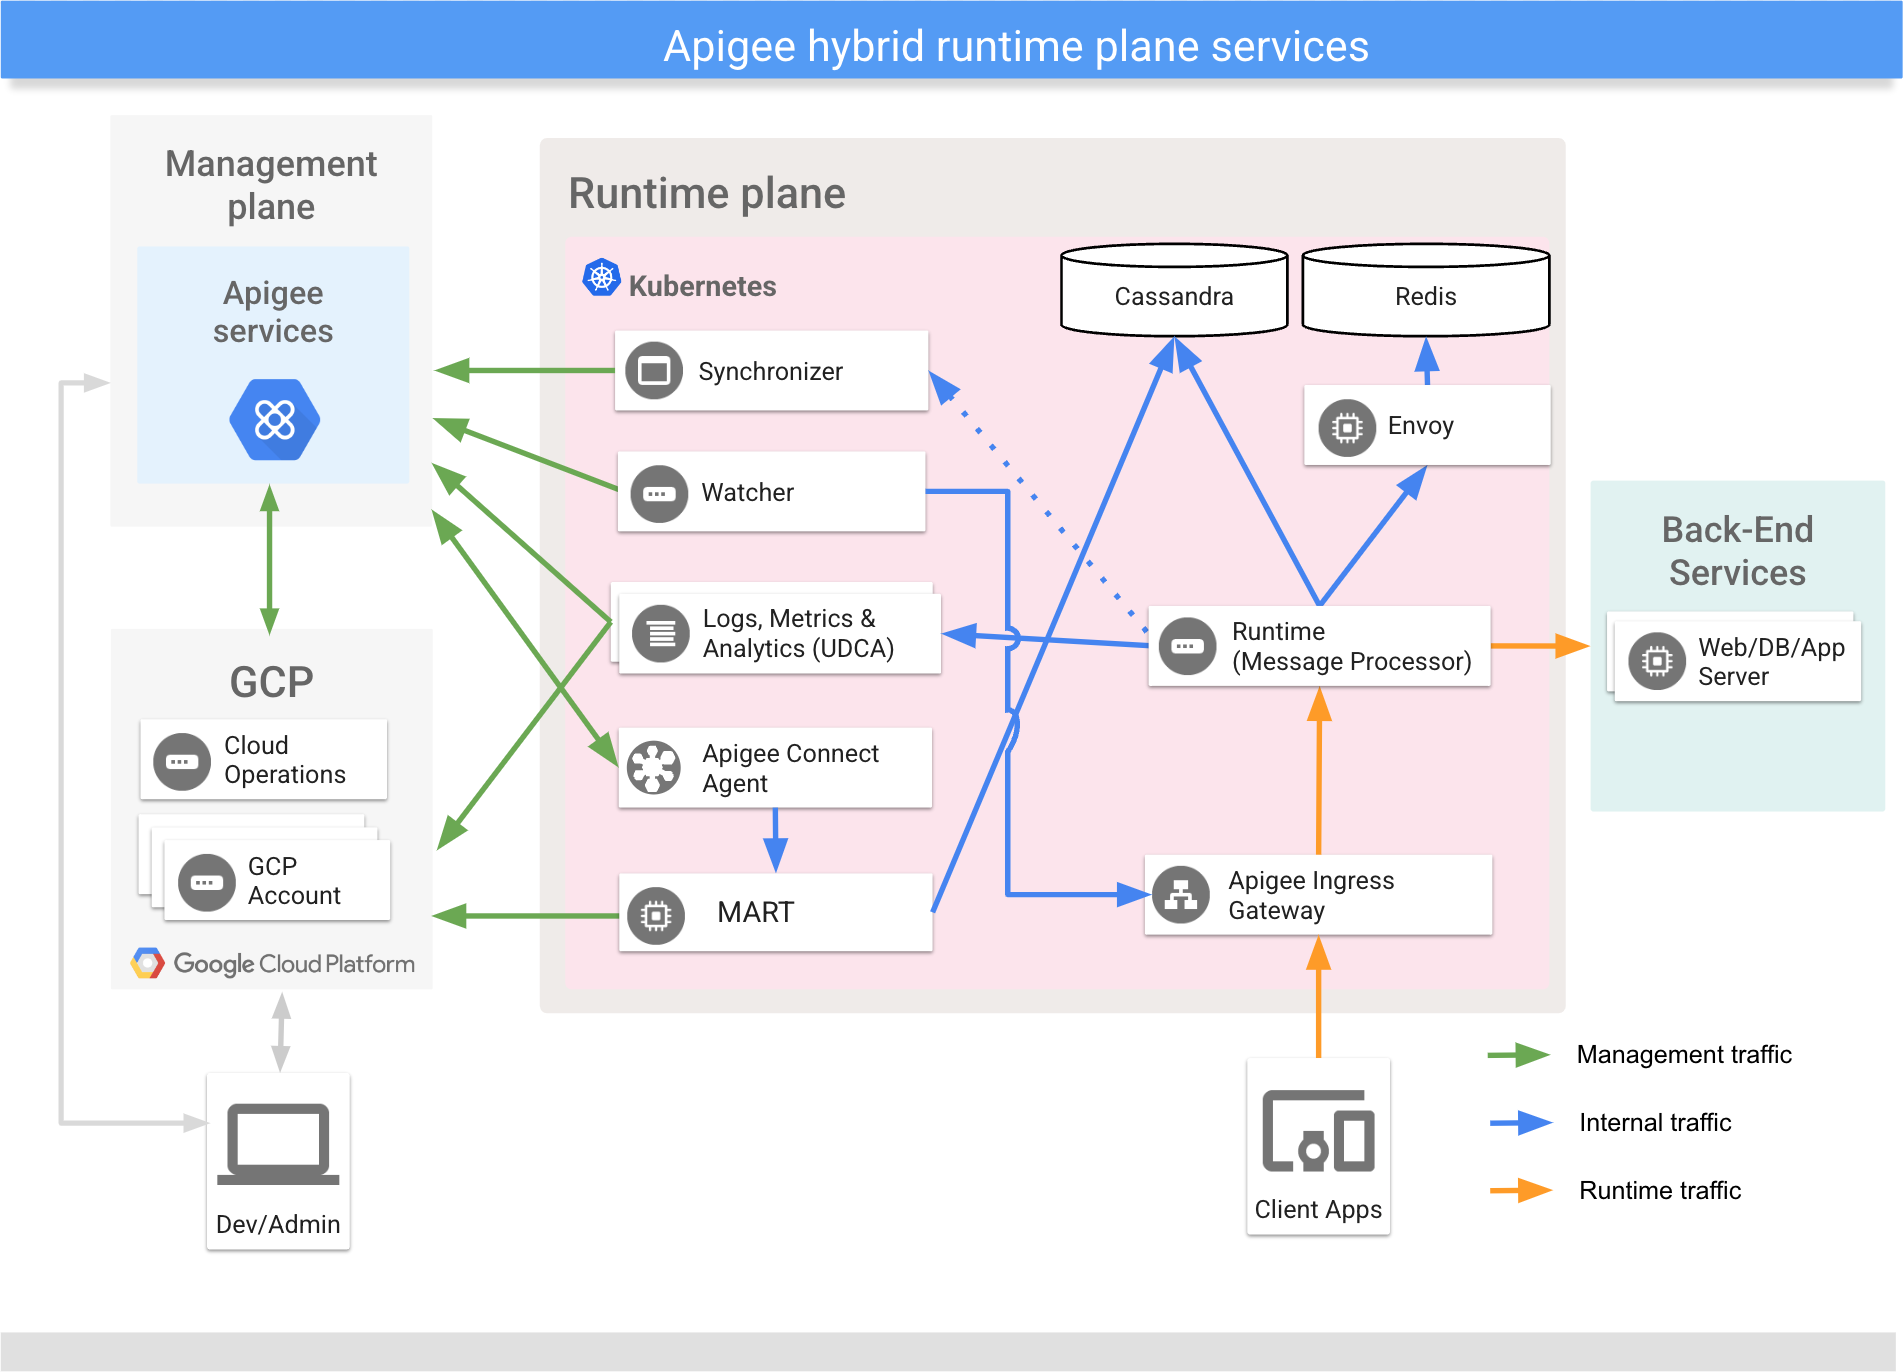 Primary services that execute on the hybrid runtime plane showing Apigee Connect